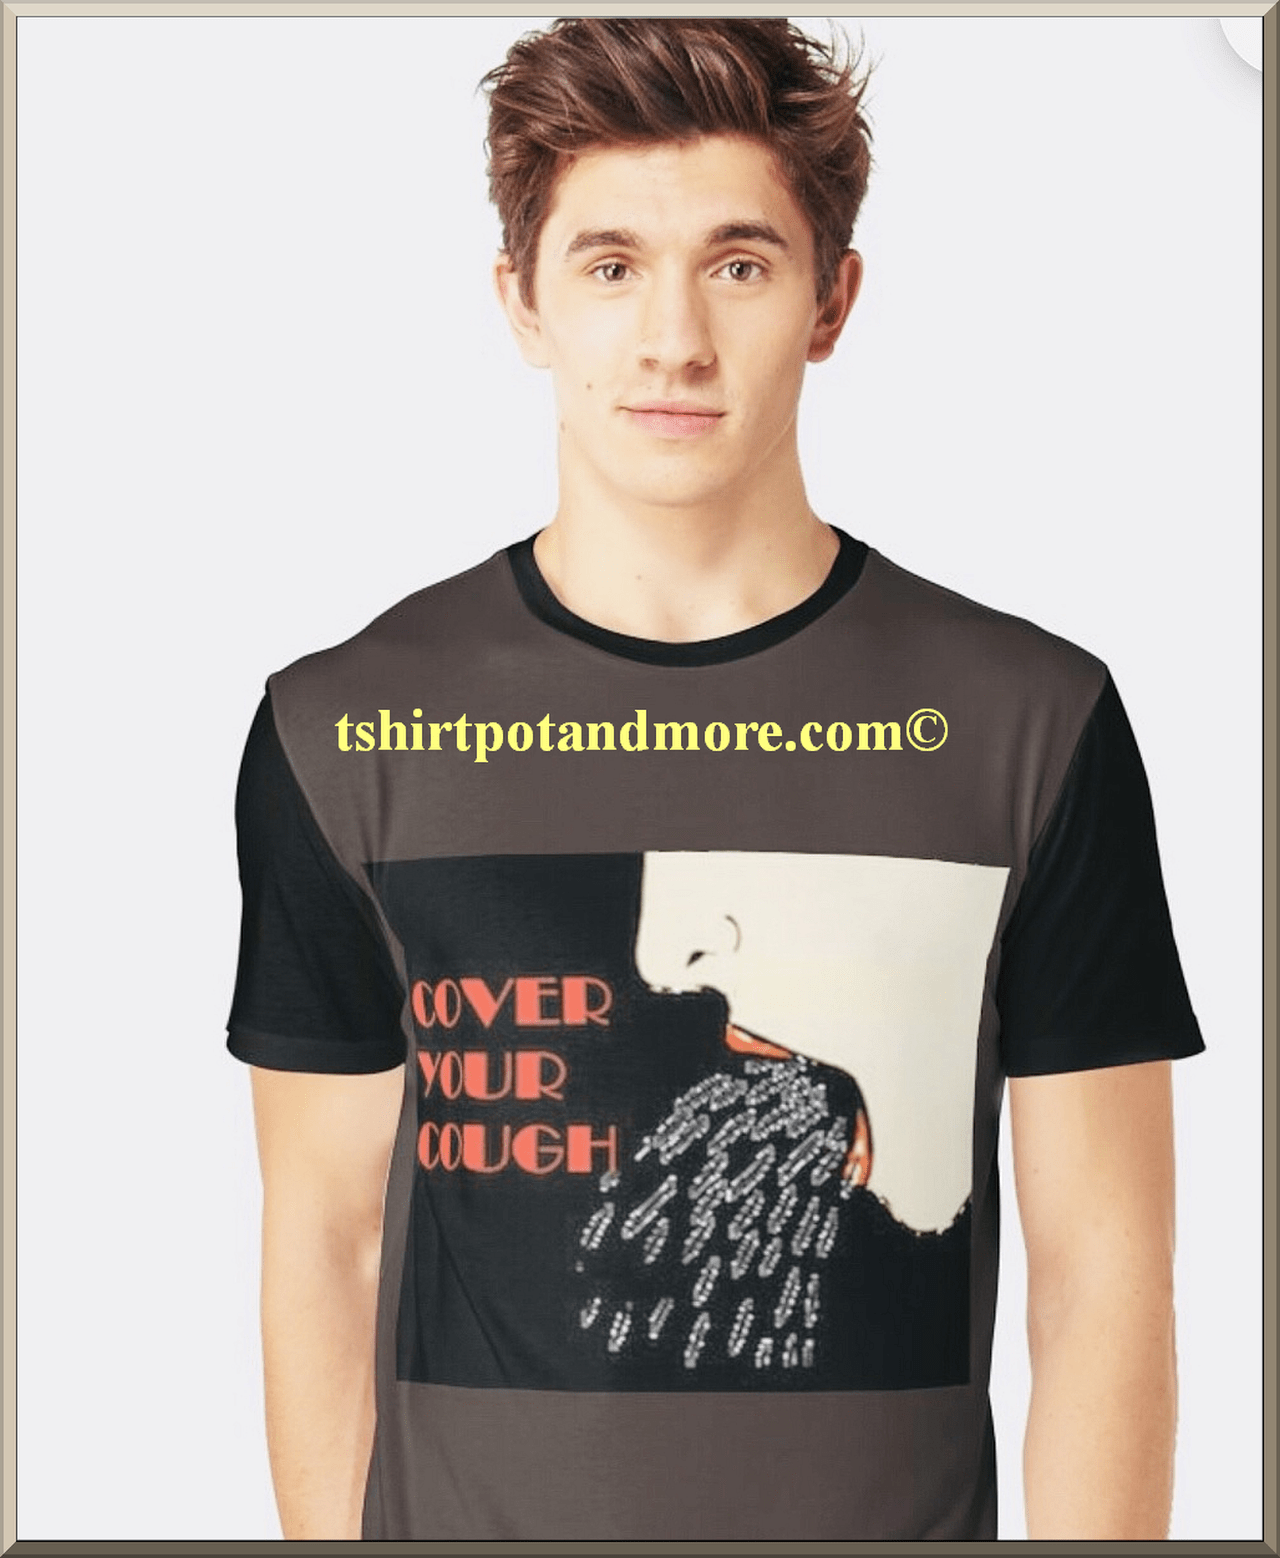 "cover your cough graphic print t shirt " by holymaud | Redbubble"